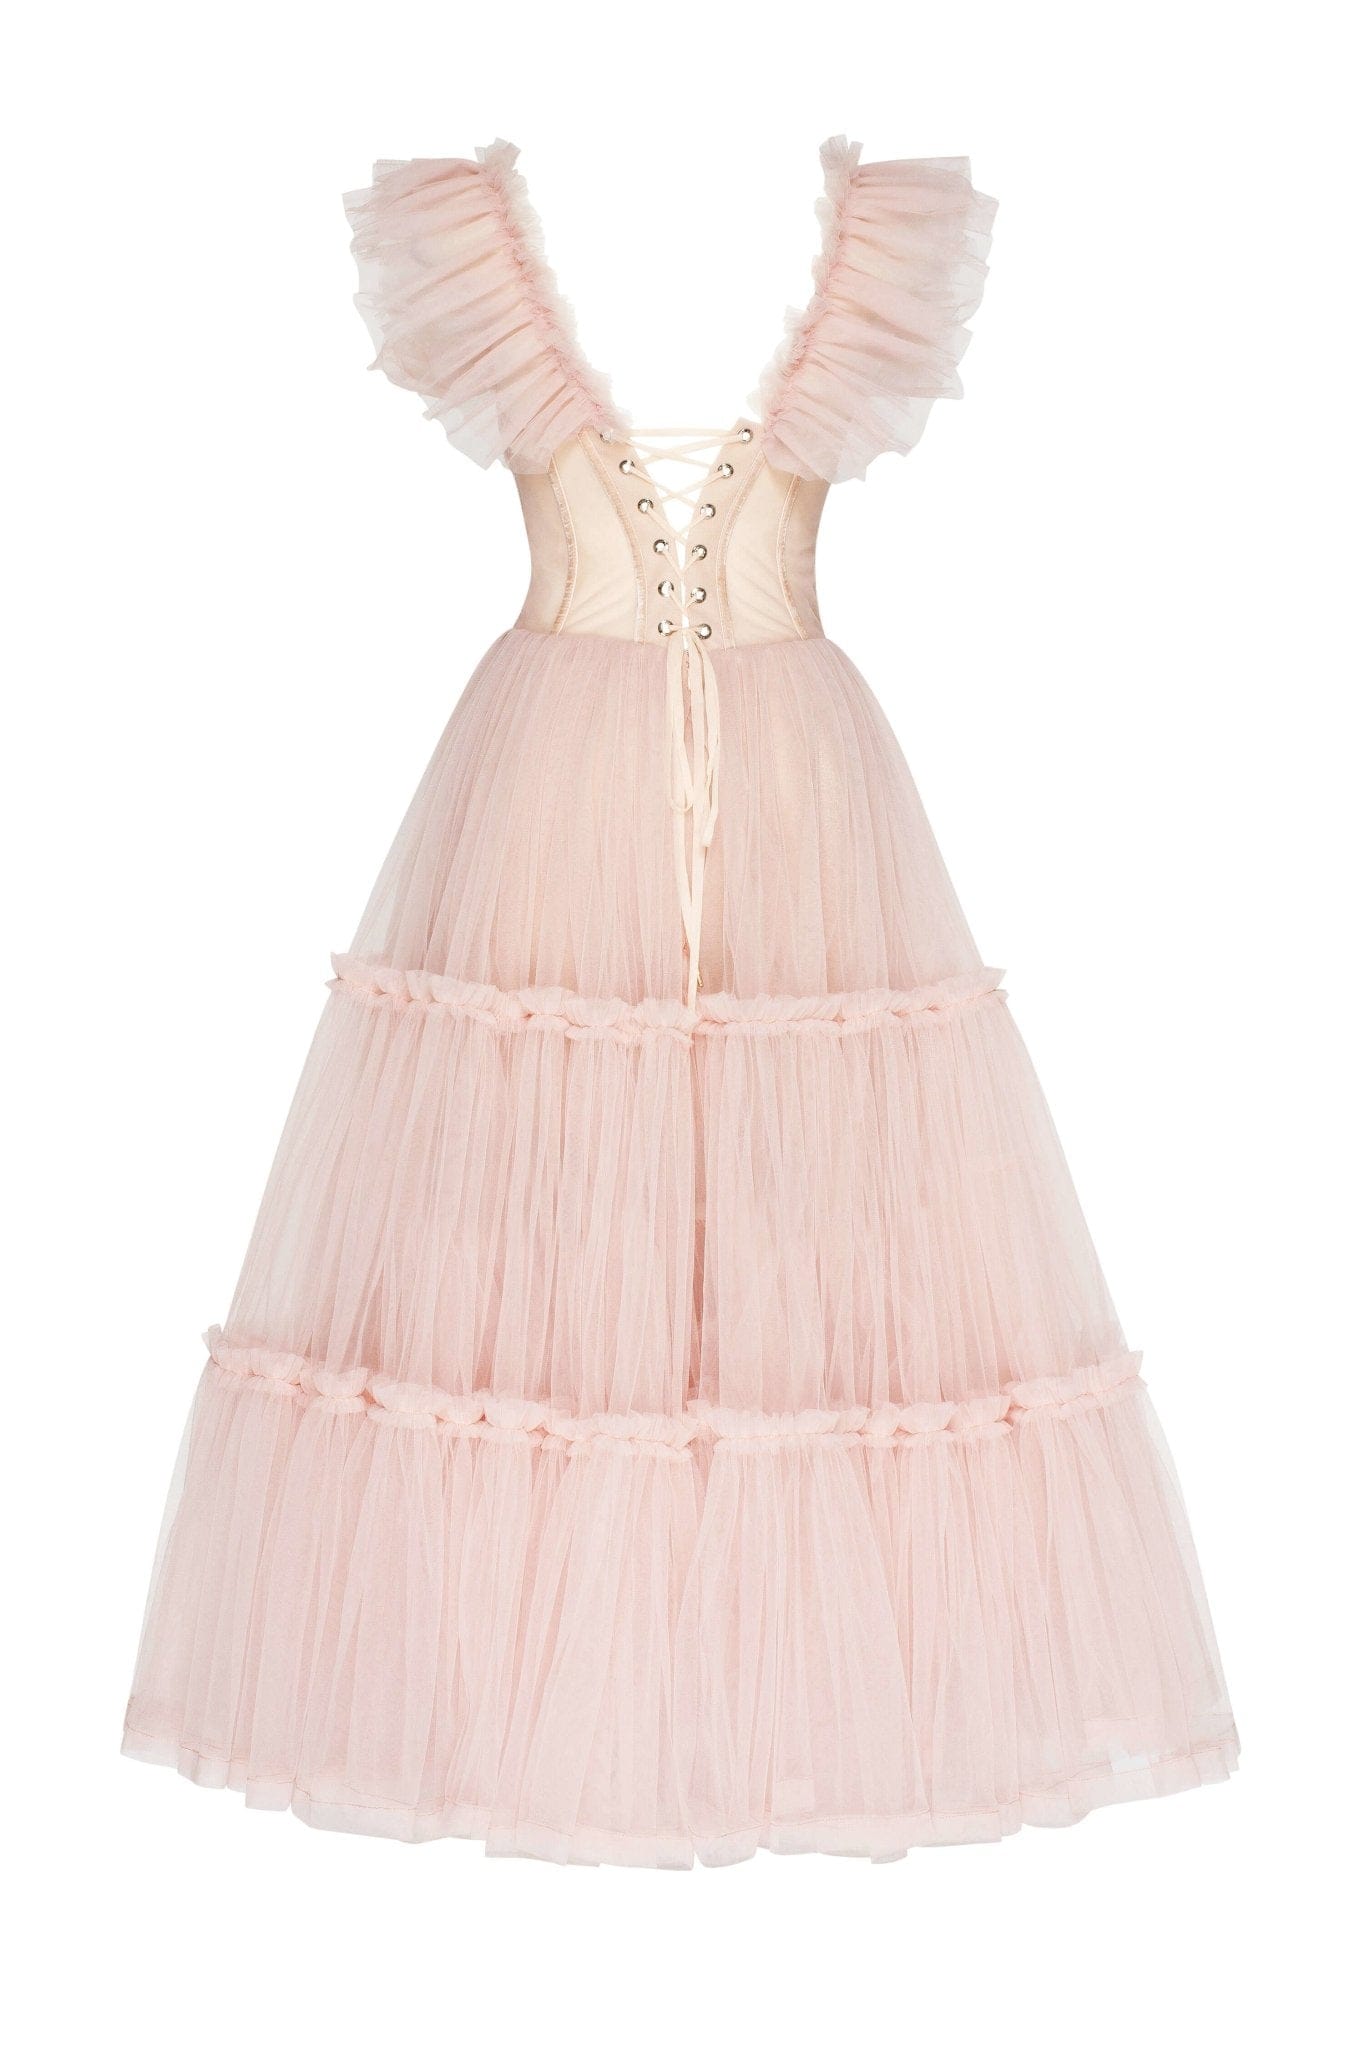 Rose Ruffled Dresses delivery Dress - Milla ➤➤ Midi Tulle Worldwide Misty USA,